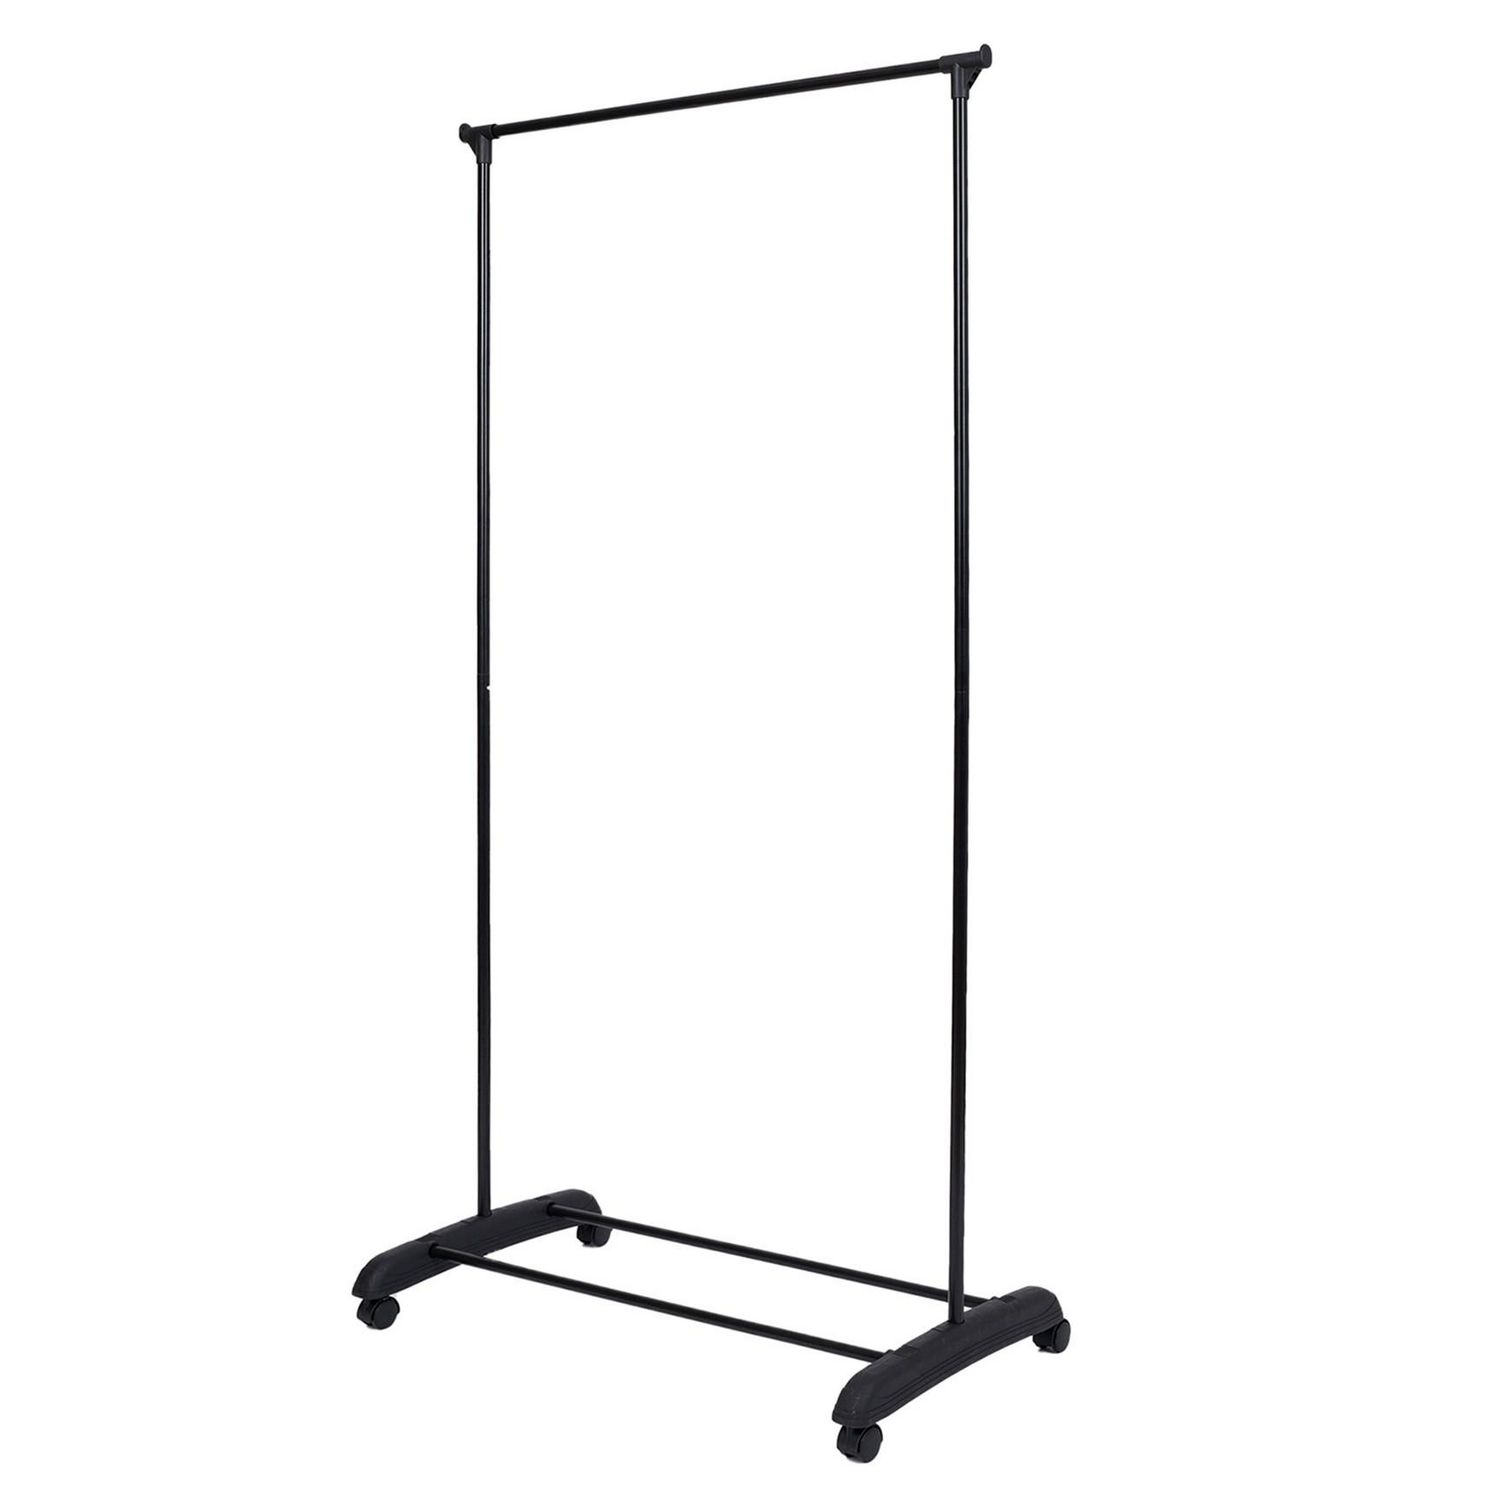 Mainstays Simple Single Rod Garment Rack, Black, Perfect hanging storage  rack for your T-shirt, skirt other light clothes and shoes